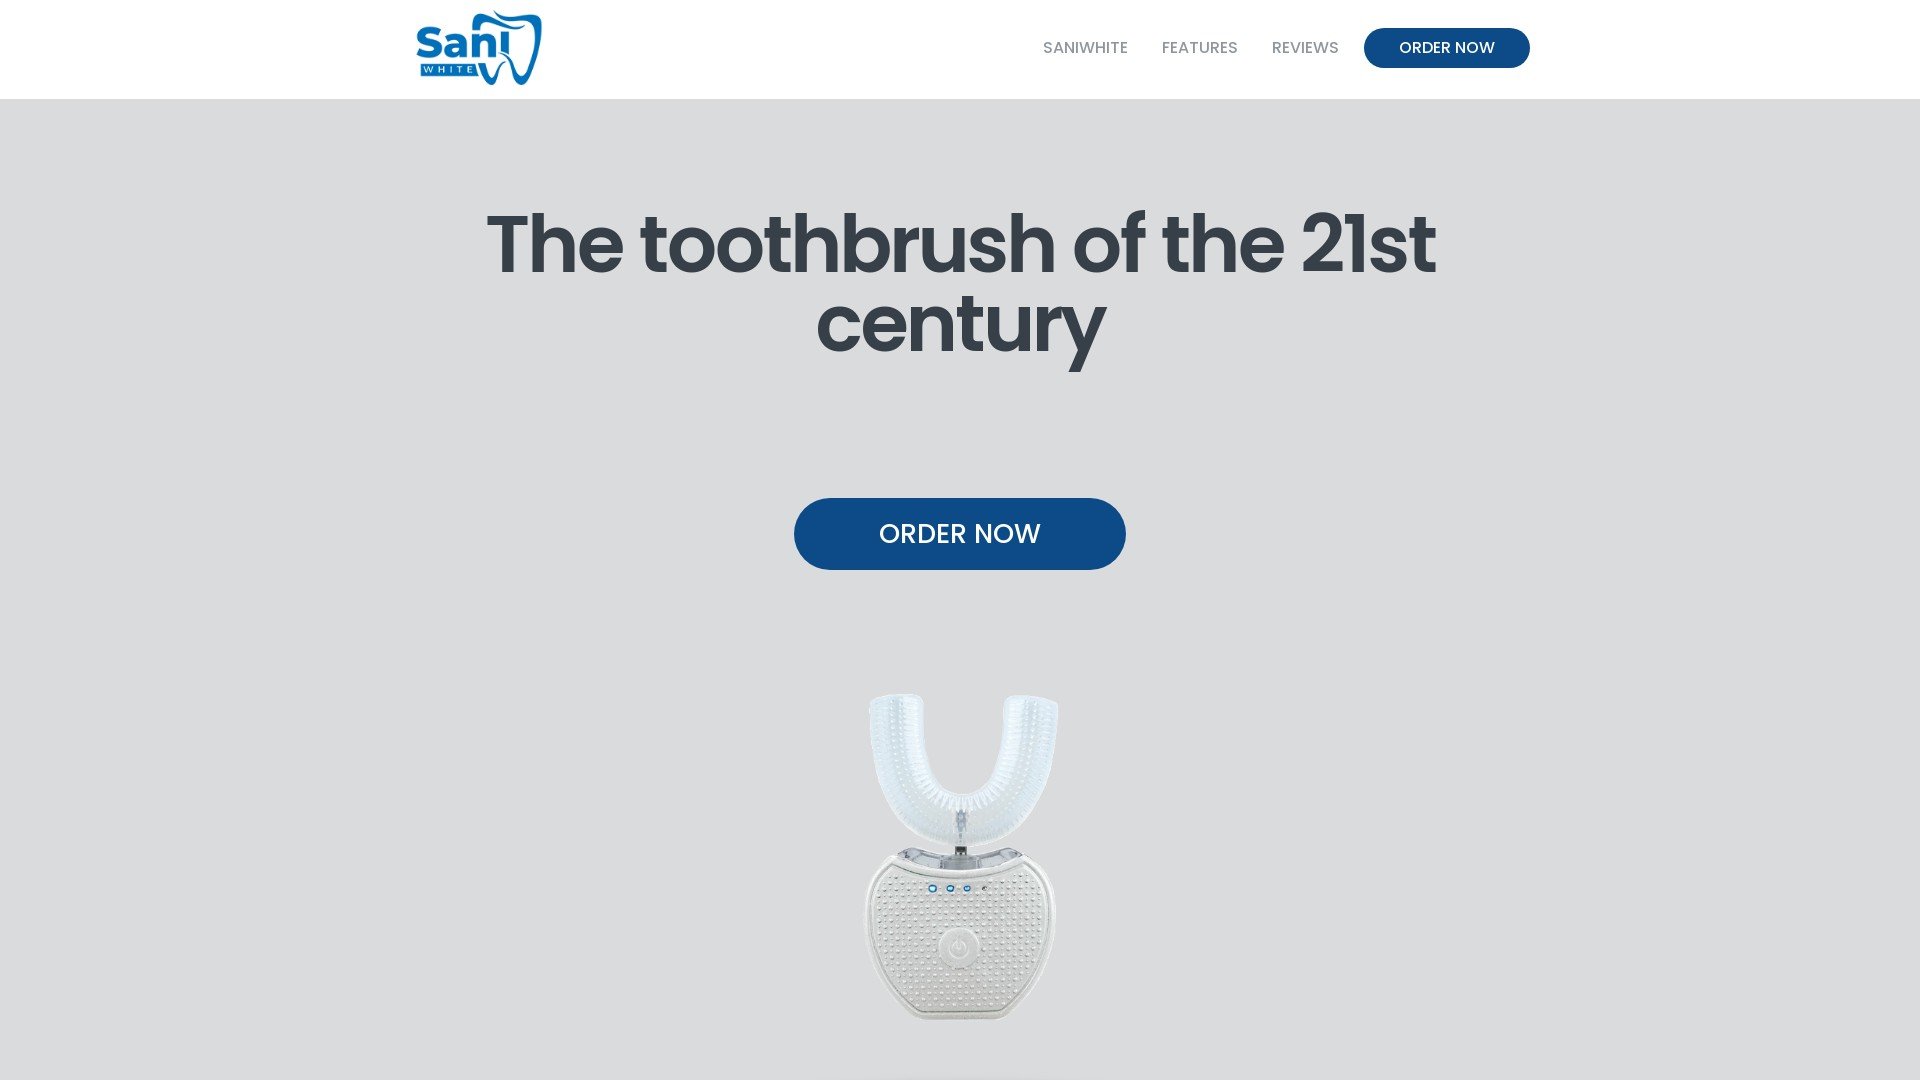 SaniWHITE or Sani WHITE a company that sells Automatic mouthpiece toothbrushes